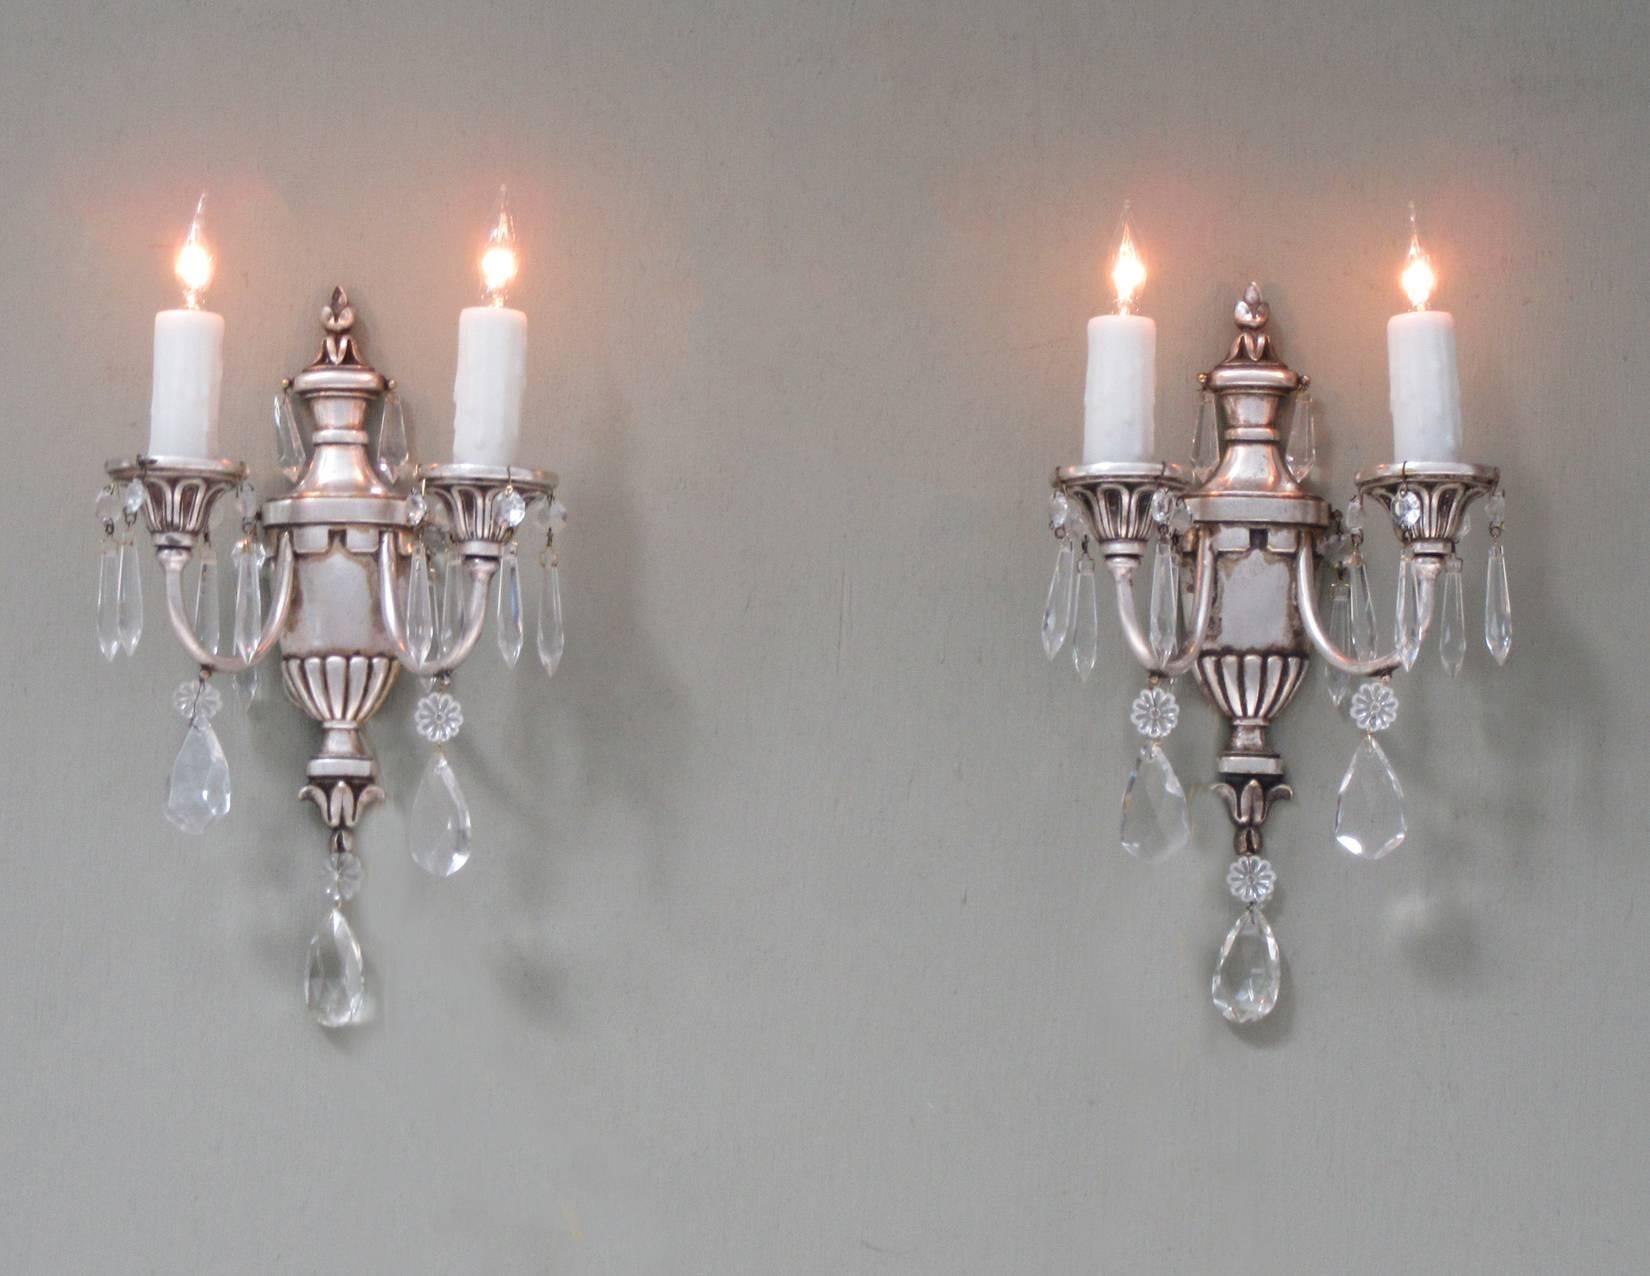 A pair of early 20th century Italian neoclassical silvered bronze and crystal sconces, featuring urn shaped bases, two candle arms and fine cut crystal pendants. The sconces have recently been cleaned and rewired with new porcelain sockets.